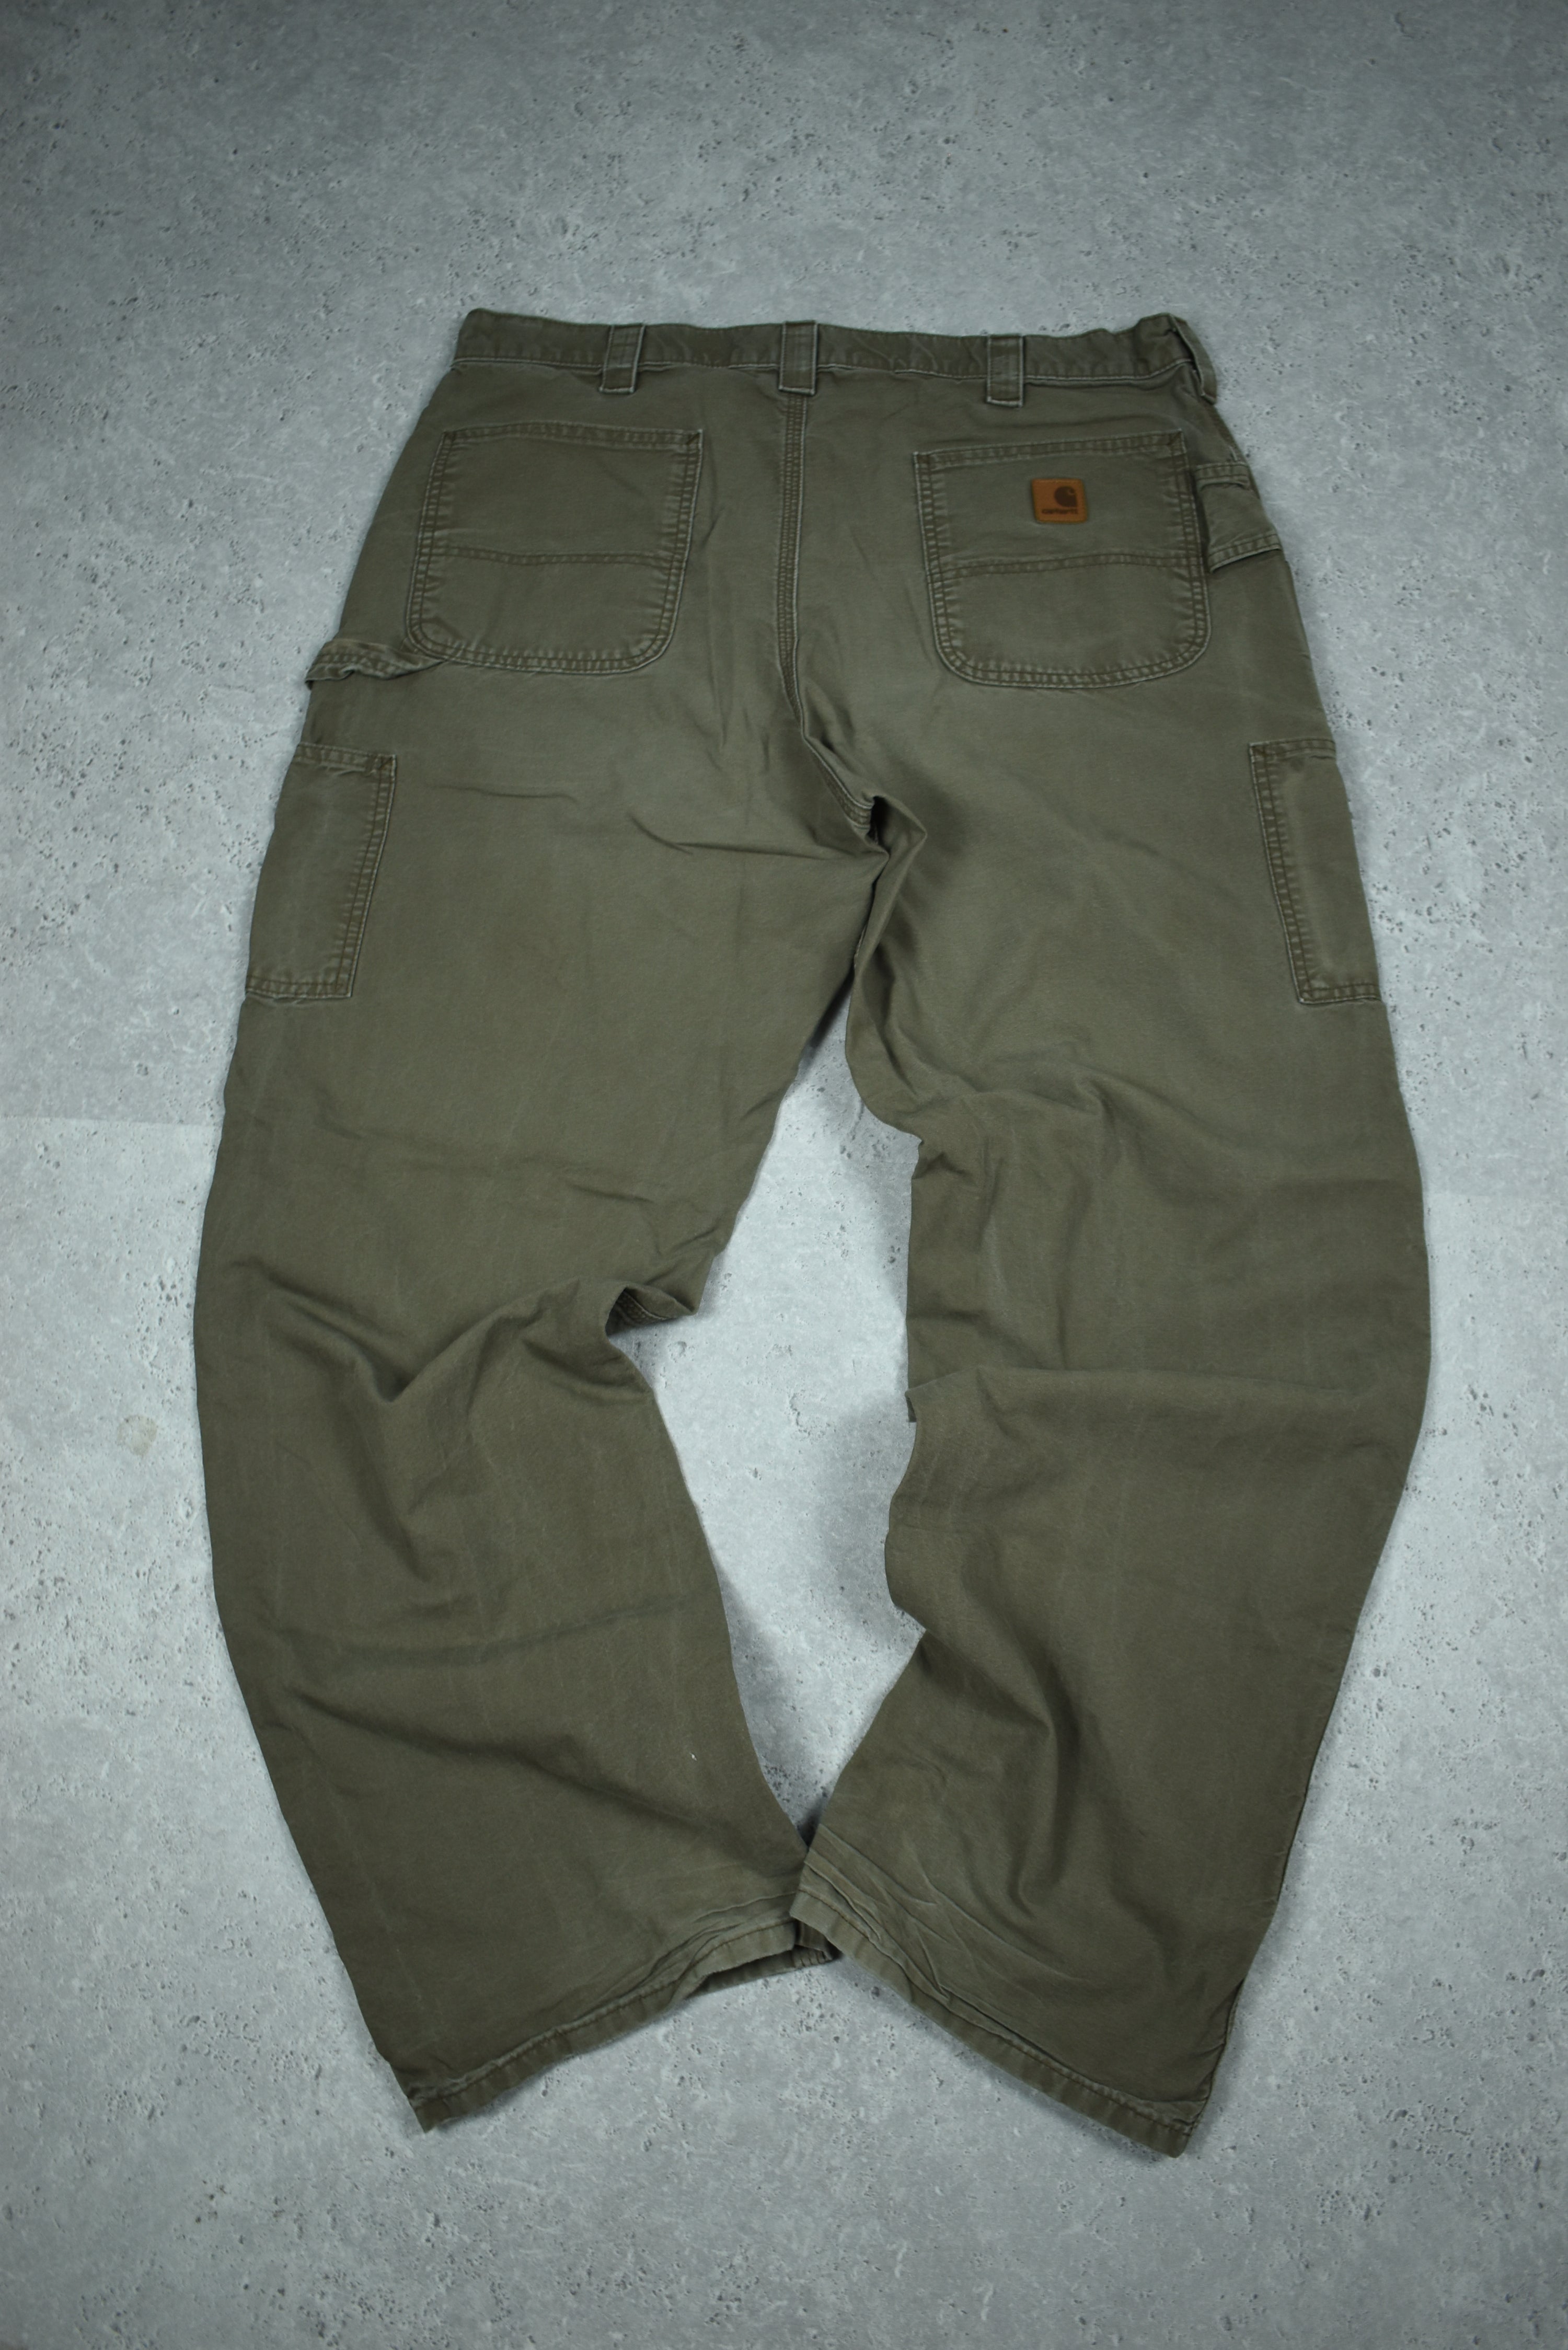 Vintage Carhartt Dungaree Fit Jeans 38x34